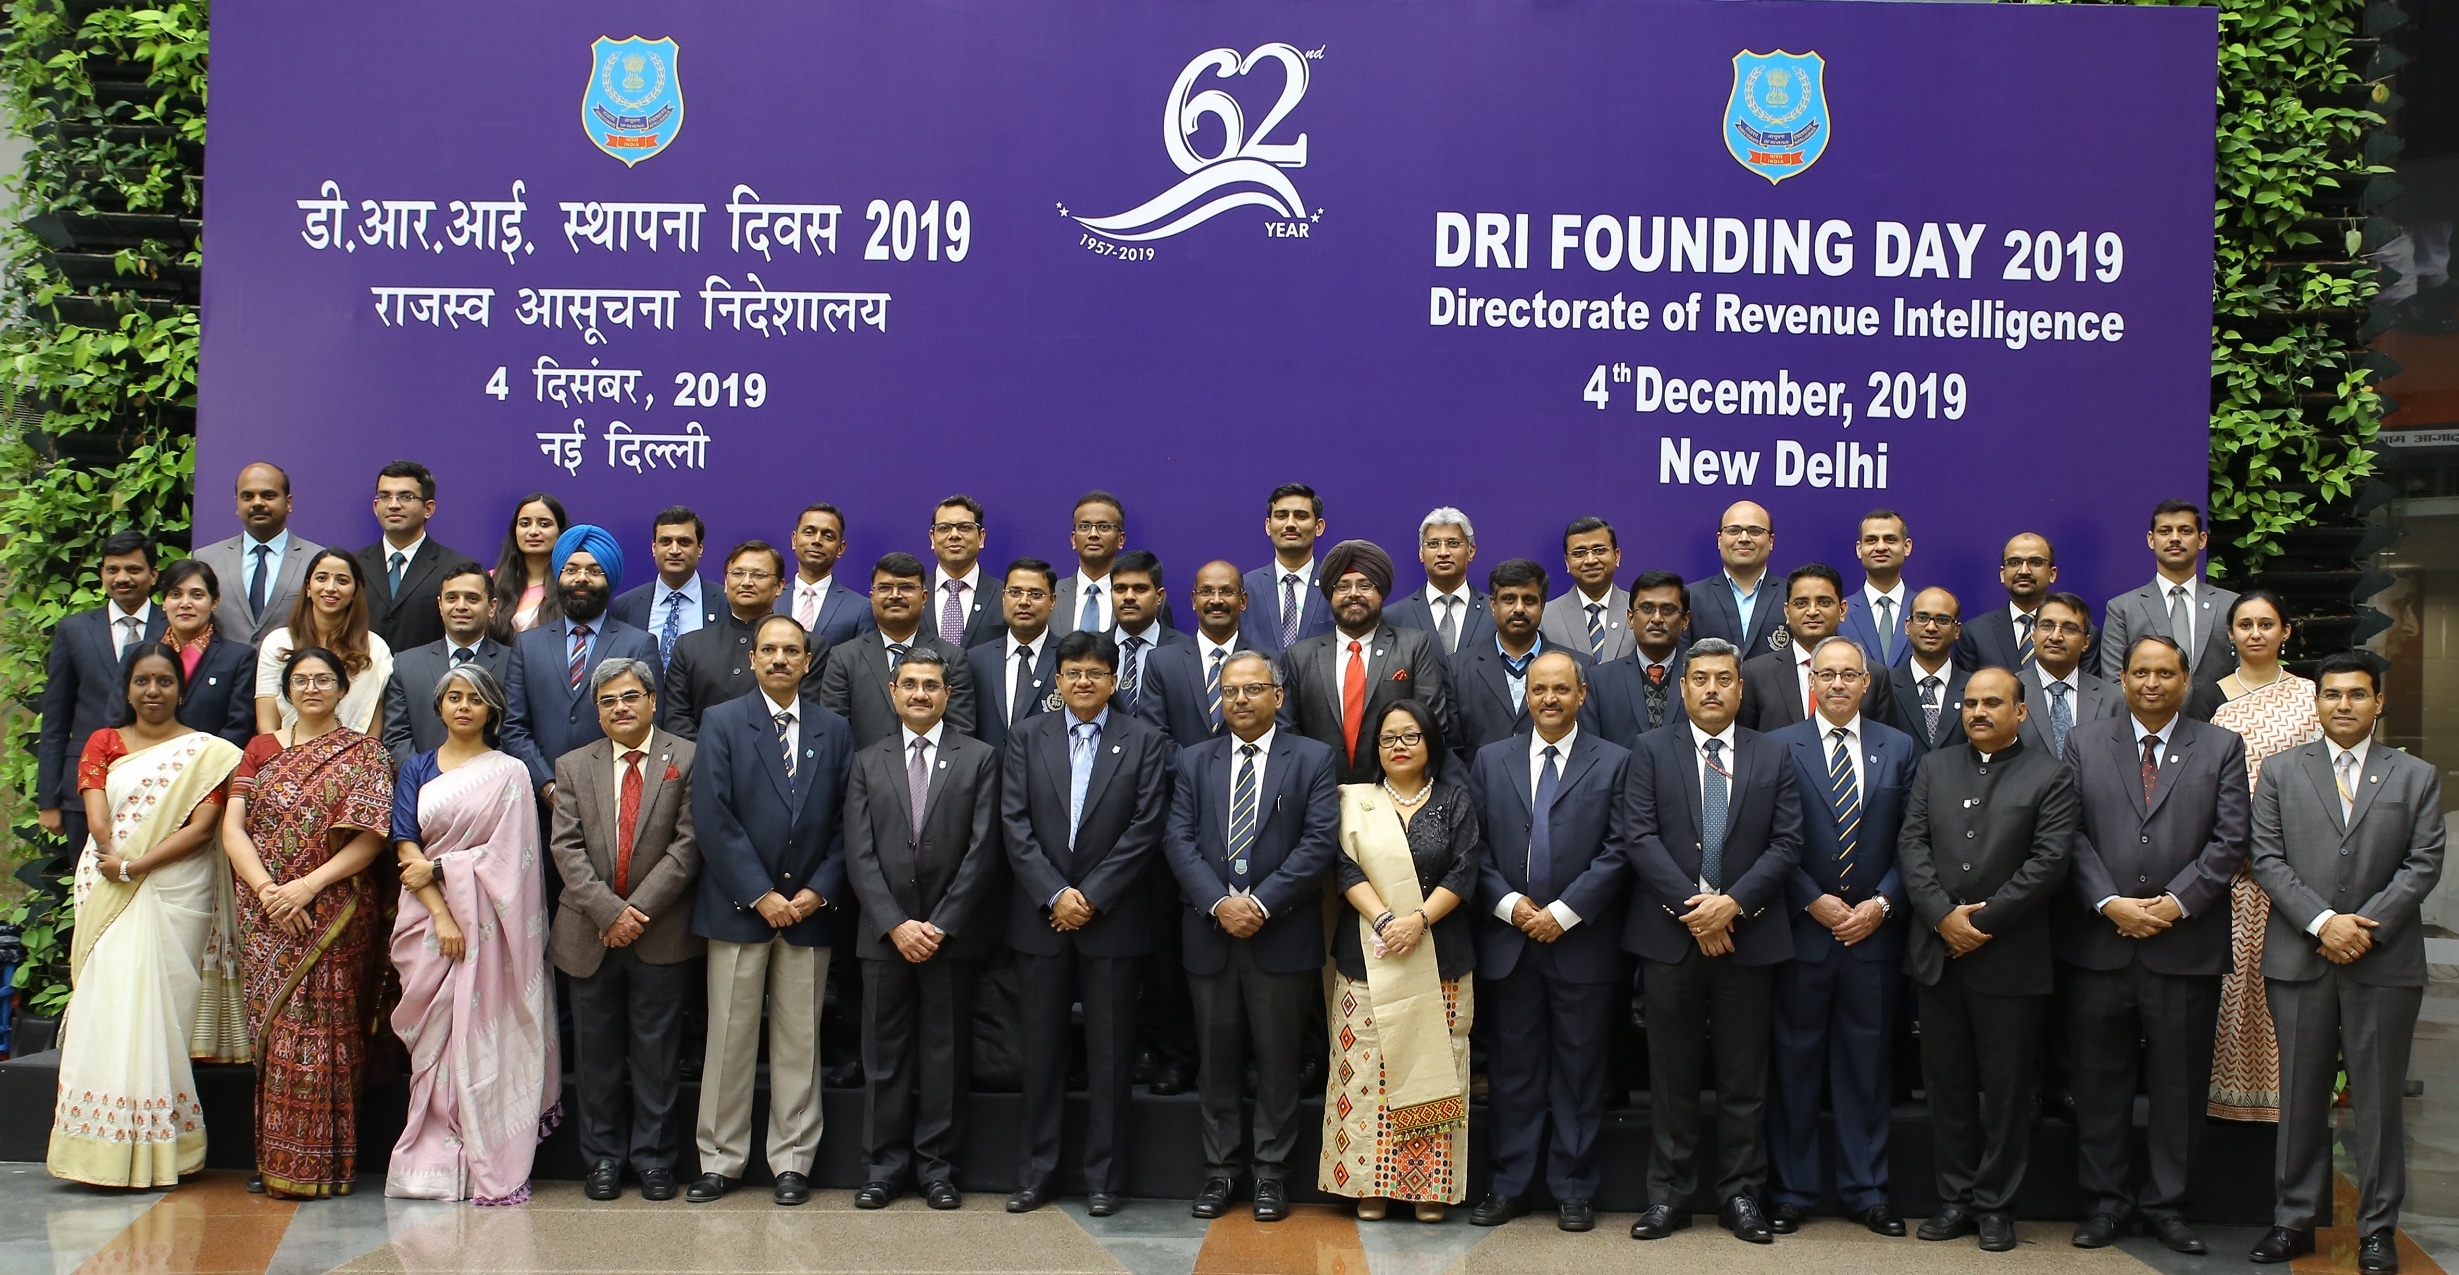 DRI officers on the occasion of DRI Founding Day 2019.